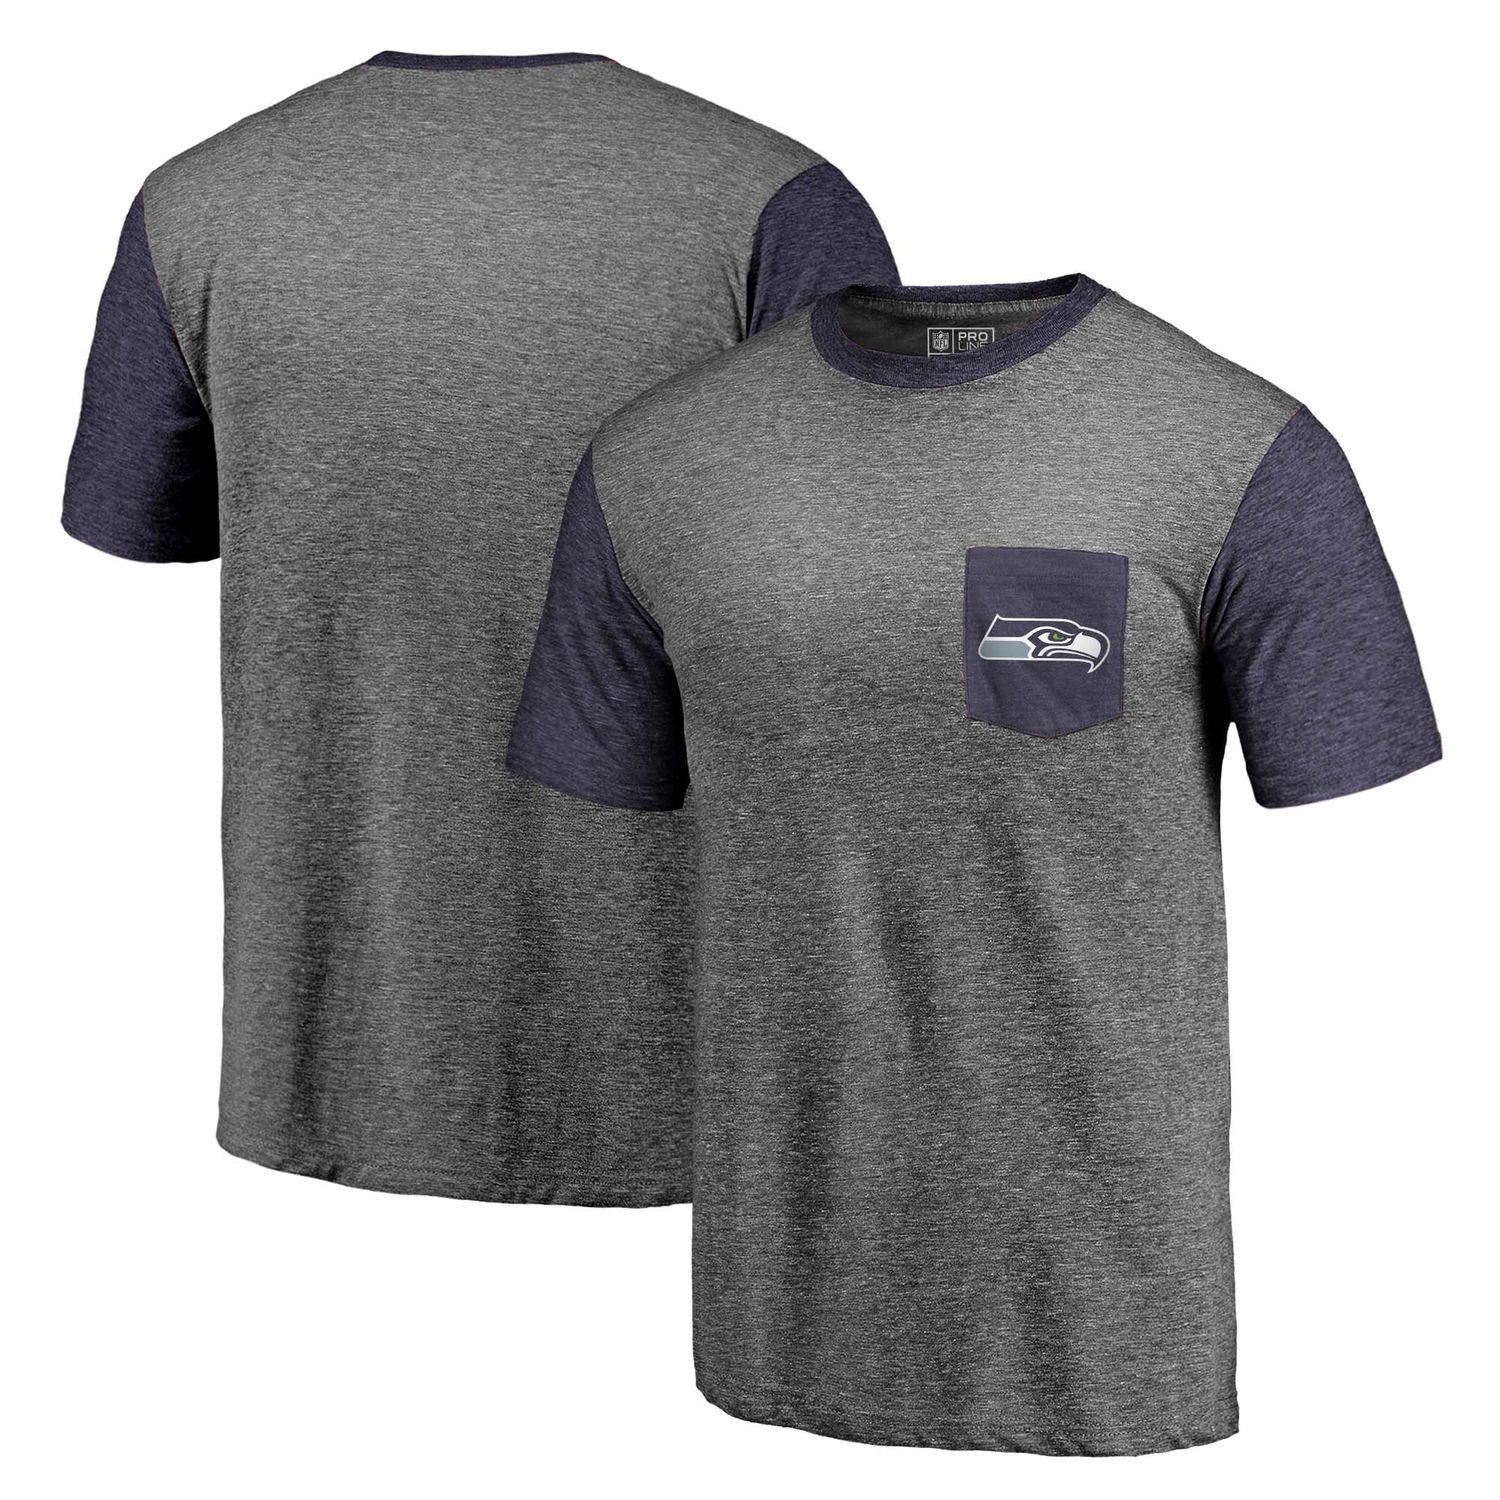 Men's Seattle Seahawks NFL Pro Line by Fanatics Branded Heathered Gray-College Navy Refresh Pocket T-Shirt